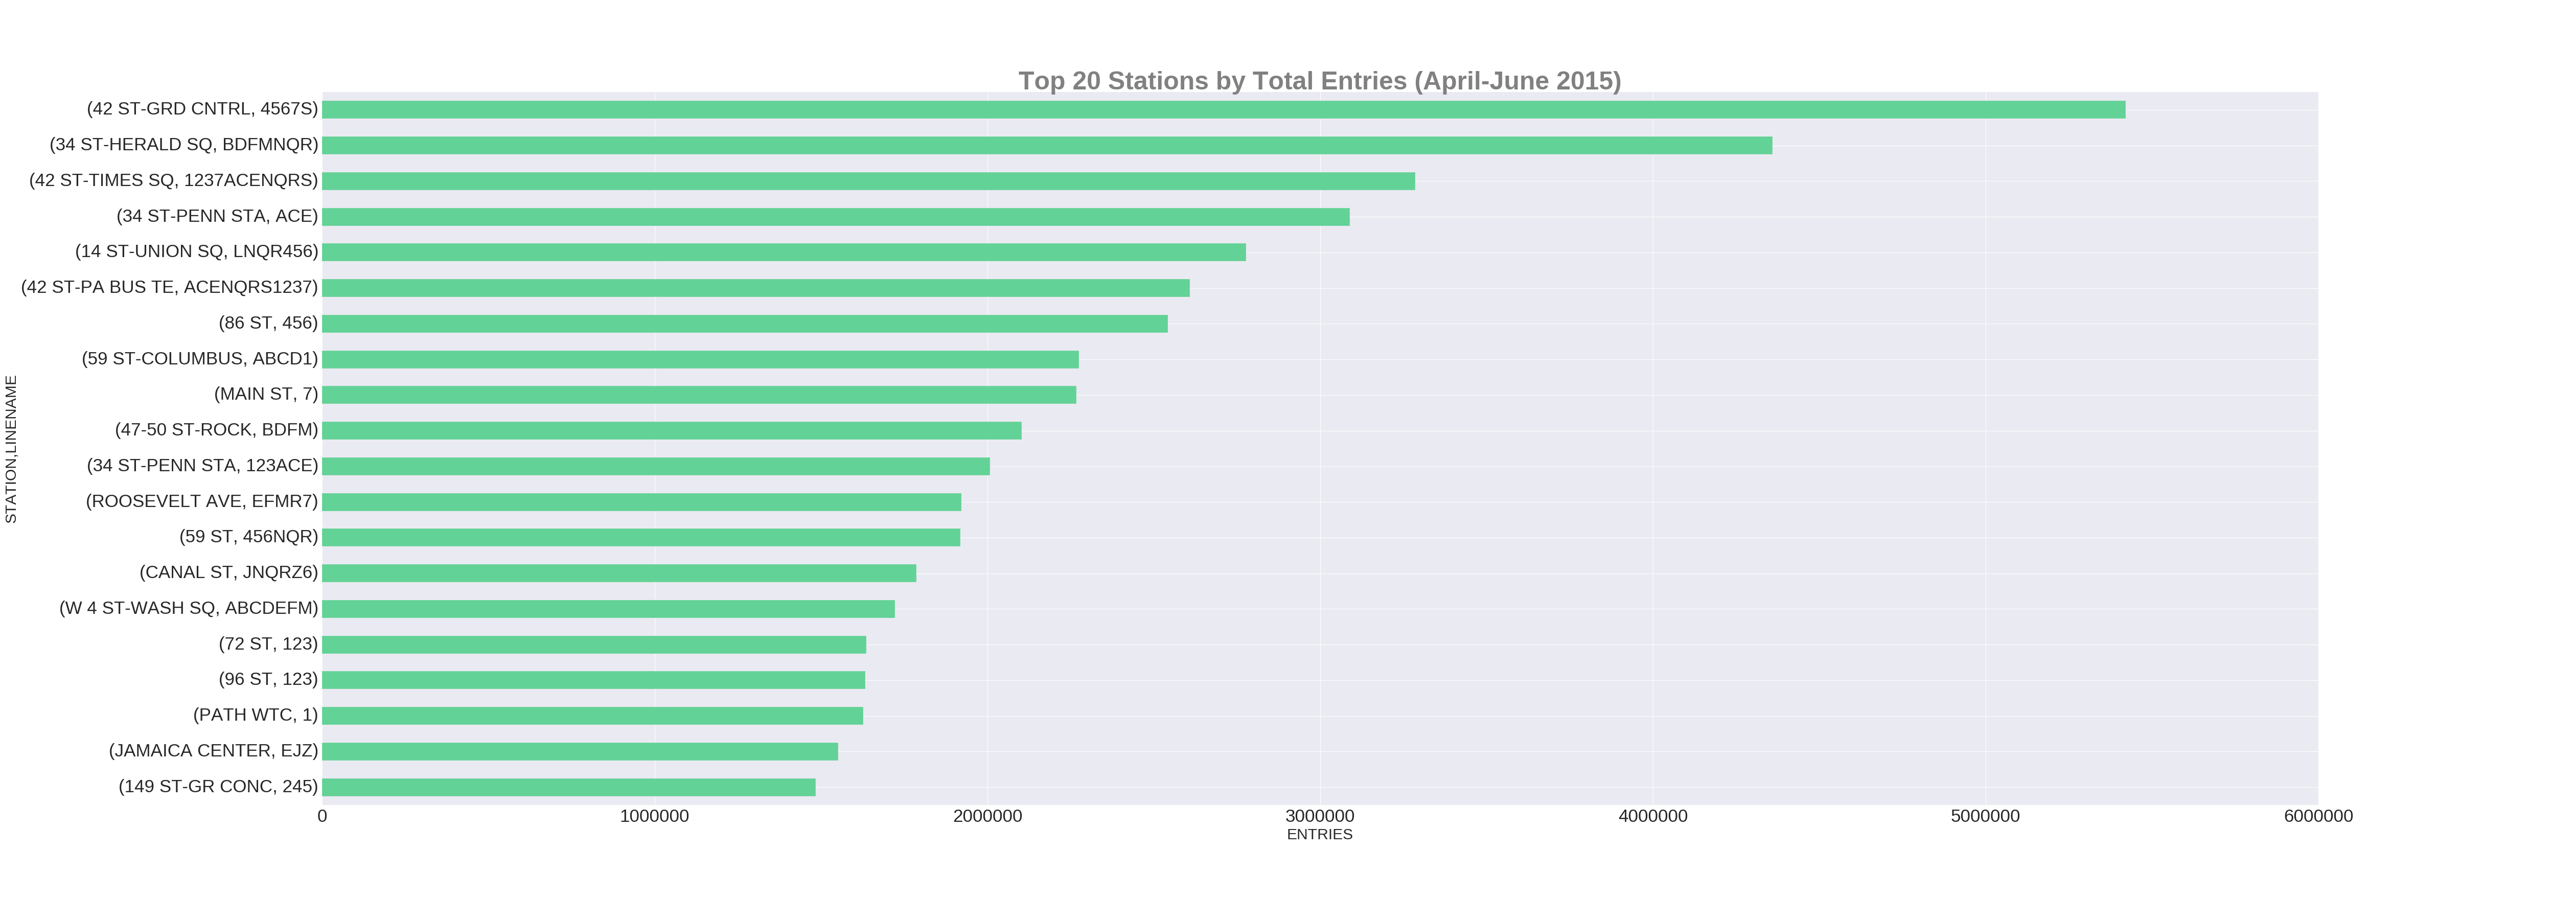 Top 20 Stations by total entries